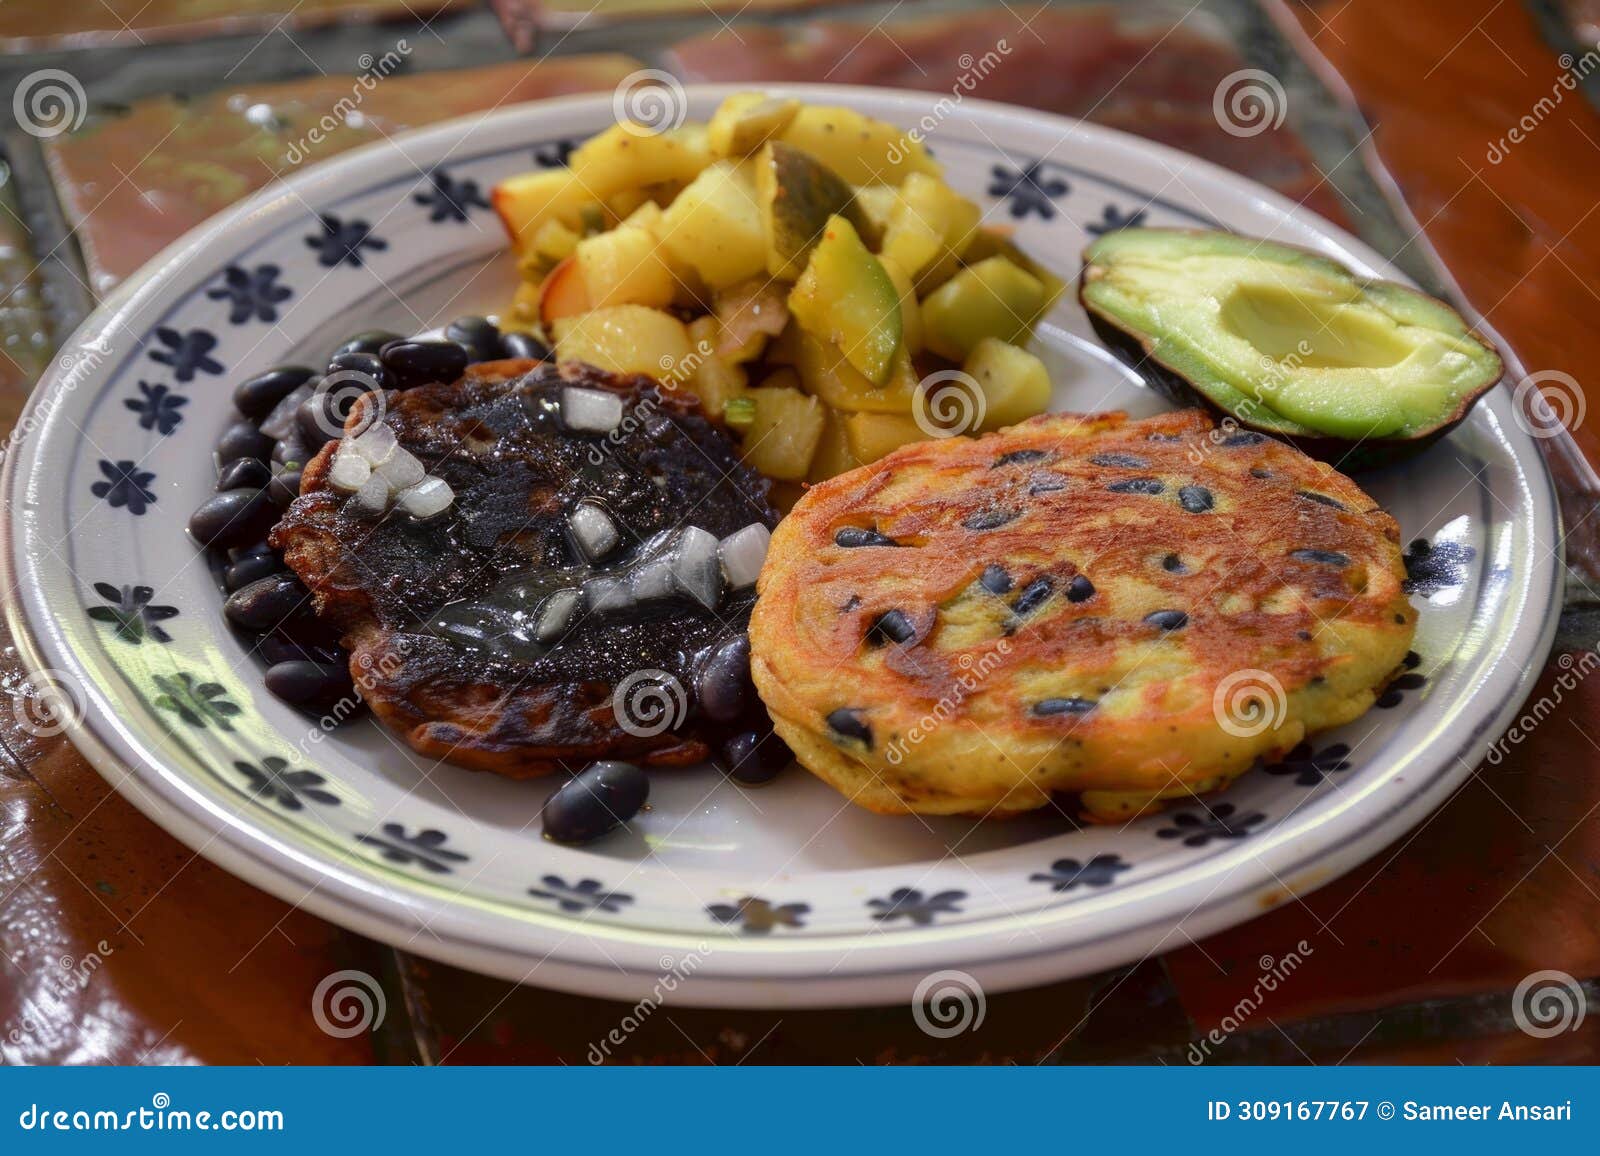 two savory black bean and potato pancakes served on a plate with angua a la cocina, mexican food background image